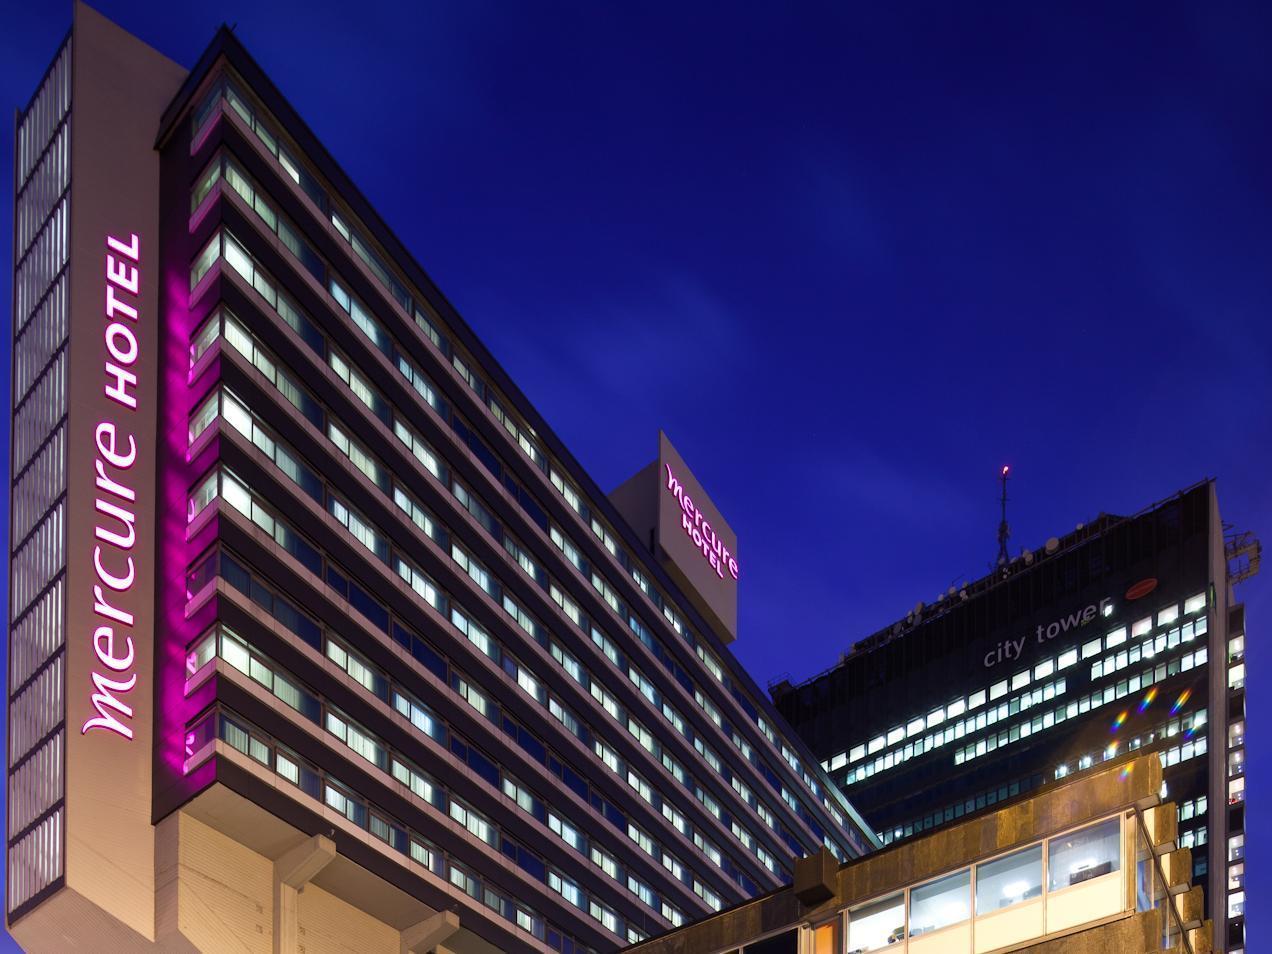 Mercure Manchester Piccadilly Hotel Exterior photo